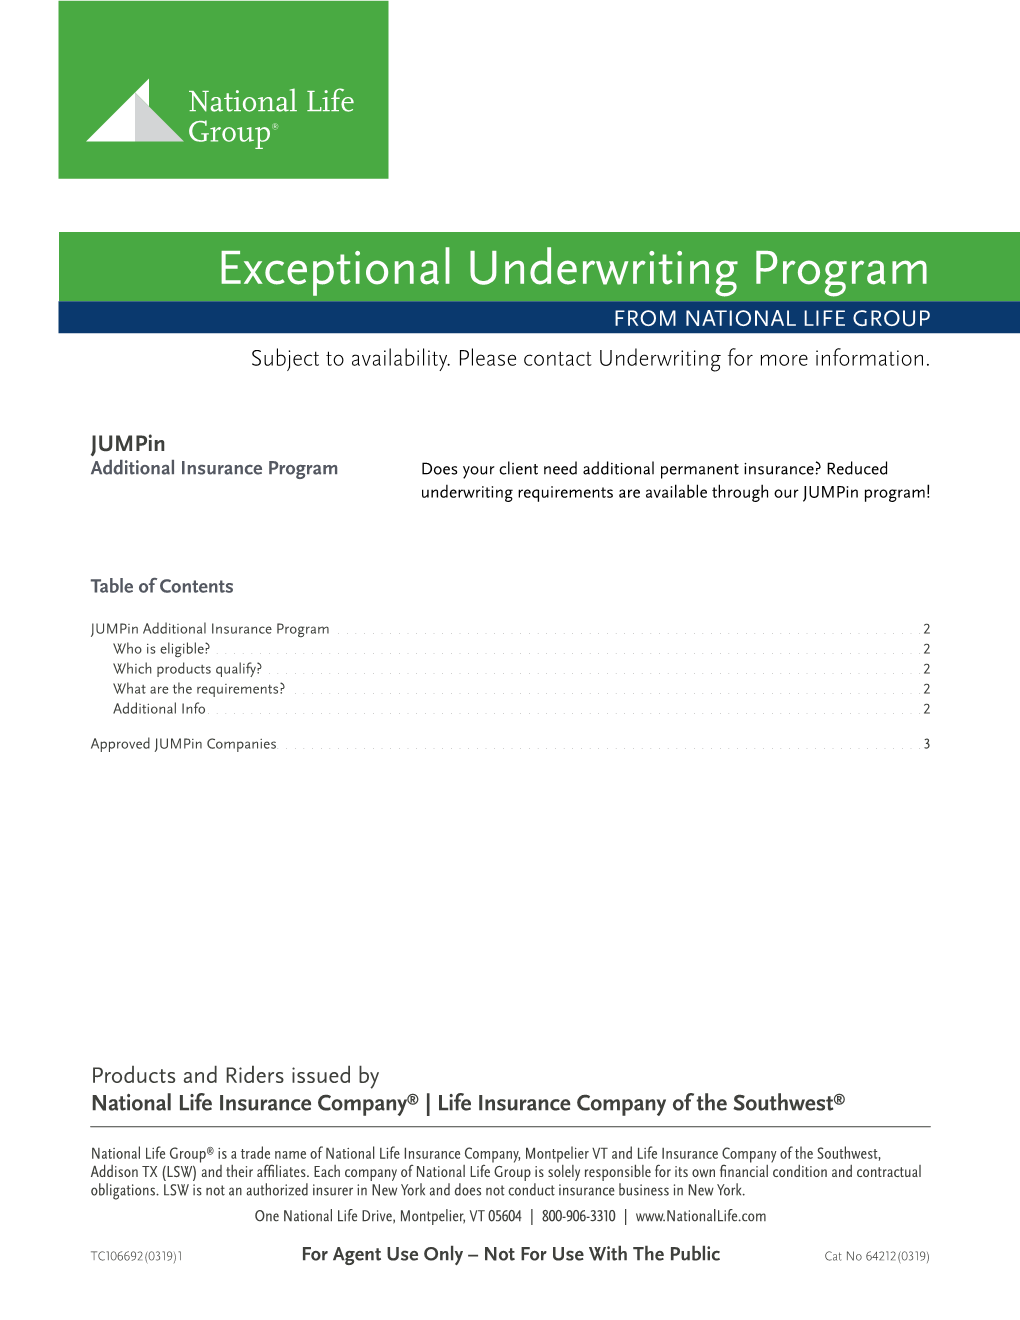 Exceptional Underwriting Program from NATIONAL LIFE GROUP Subject to Availability